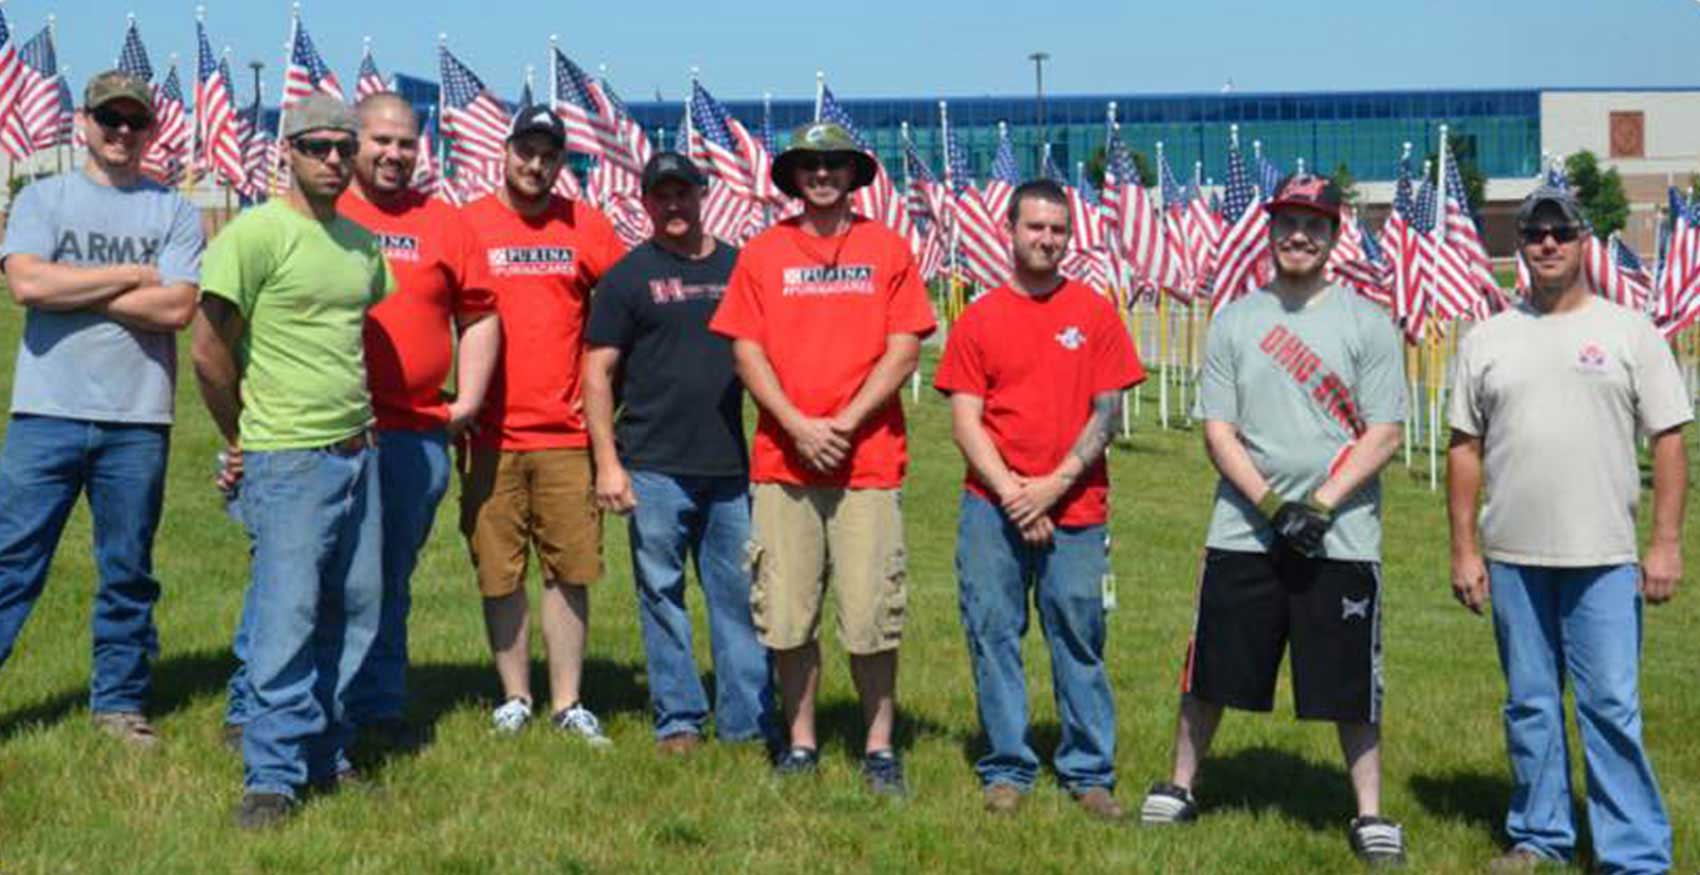 Group of associates standing in front of American flags